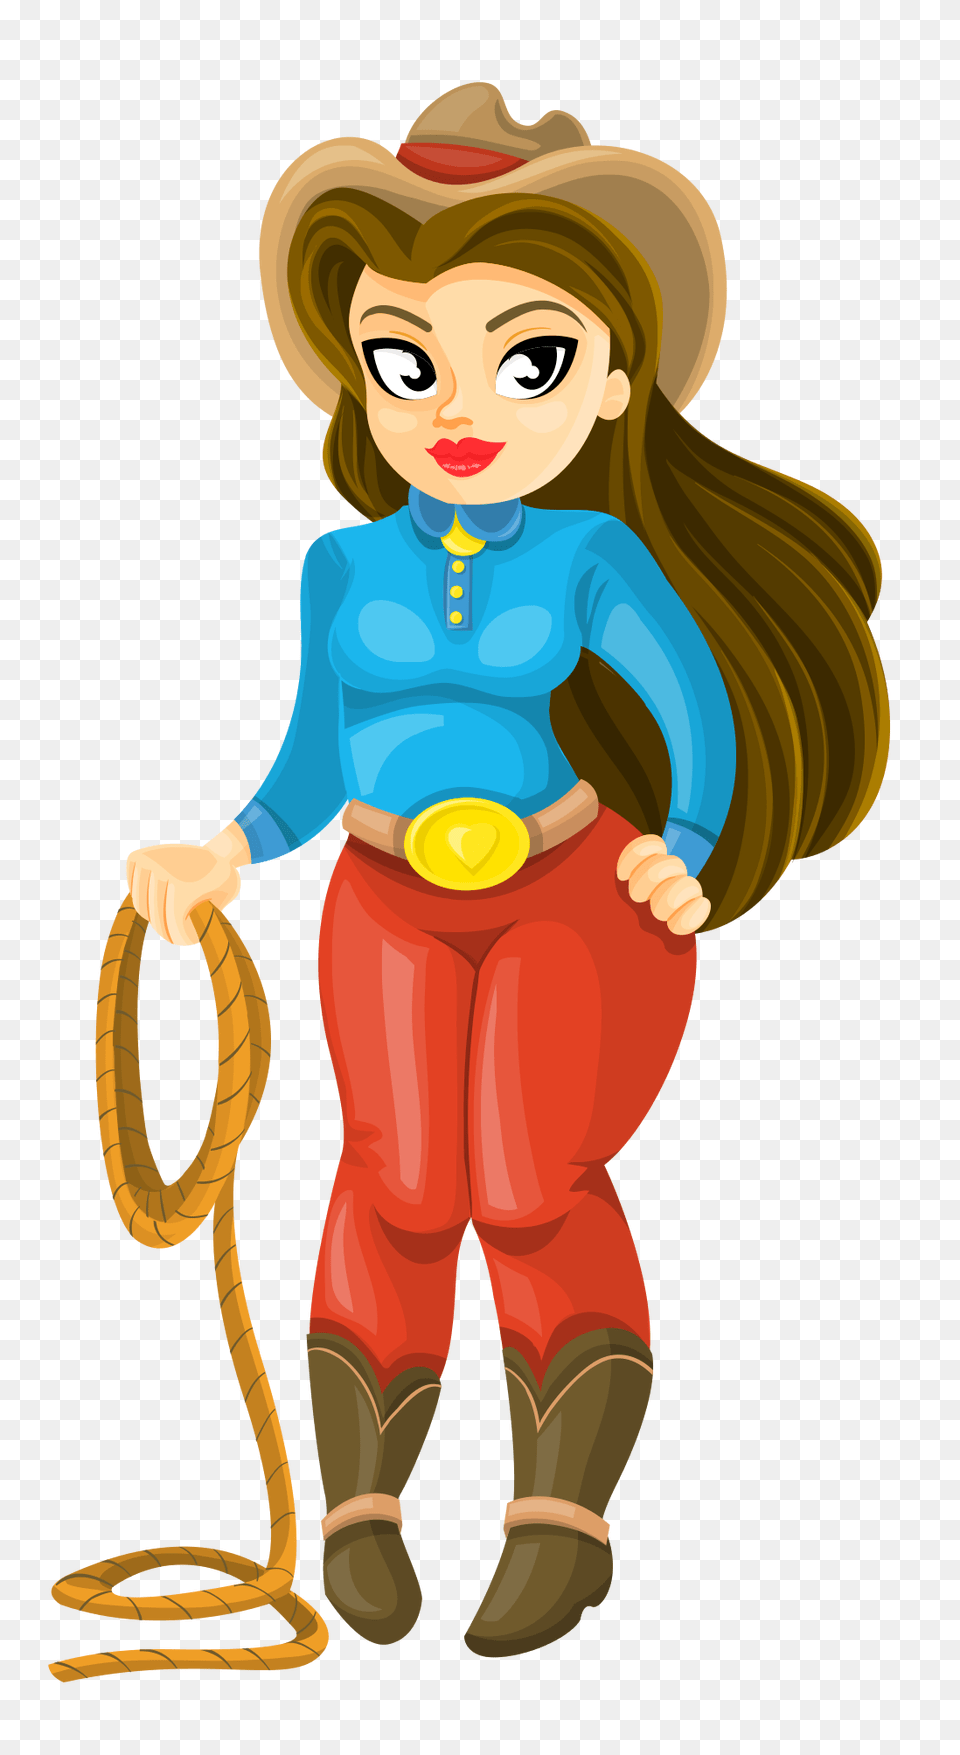 Pngpix Com Cowboy Girl Vector Transparent Image, Baby, Person, Face, Head Free Png Download